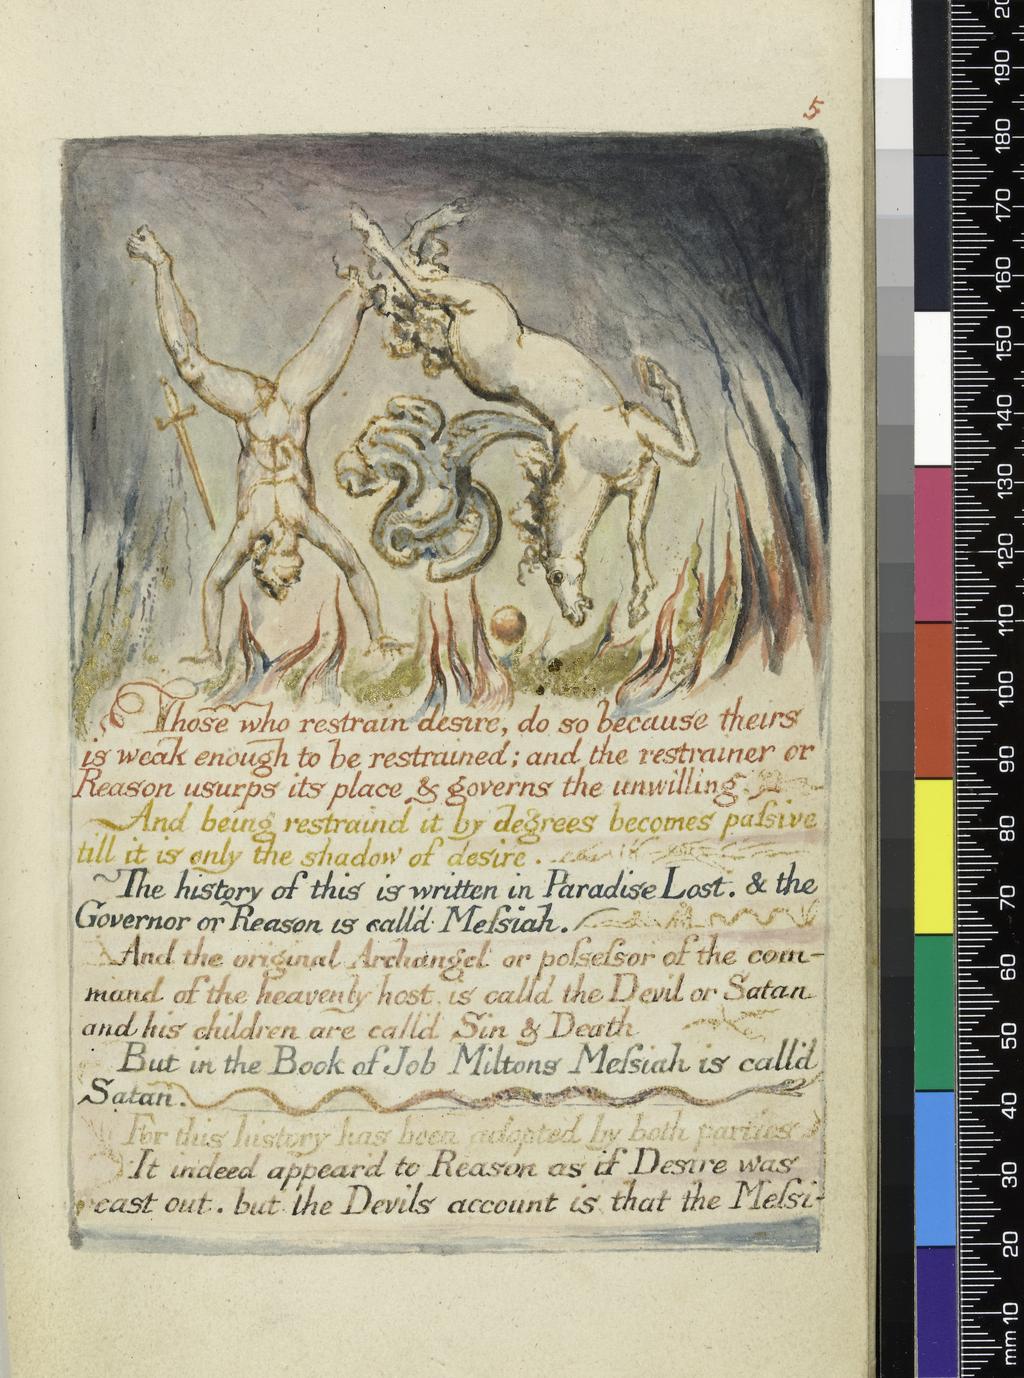 An image of Book/Print. The Marriage of Heaven and Hell. Page 5. Blake, William (British, 1757-1827). Relief etching, hand colouring and colour printing. Coloured ink and watercolour on paper, vellum binding with gilt decoration, height 202 mm, width 132 mm, circa 1808.